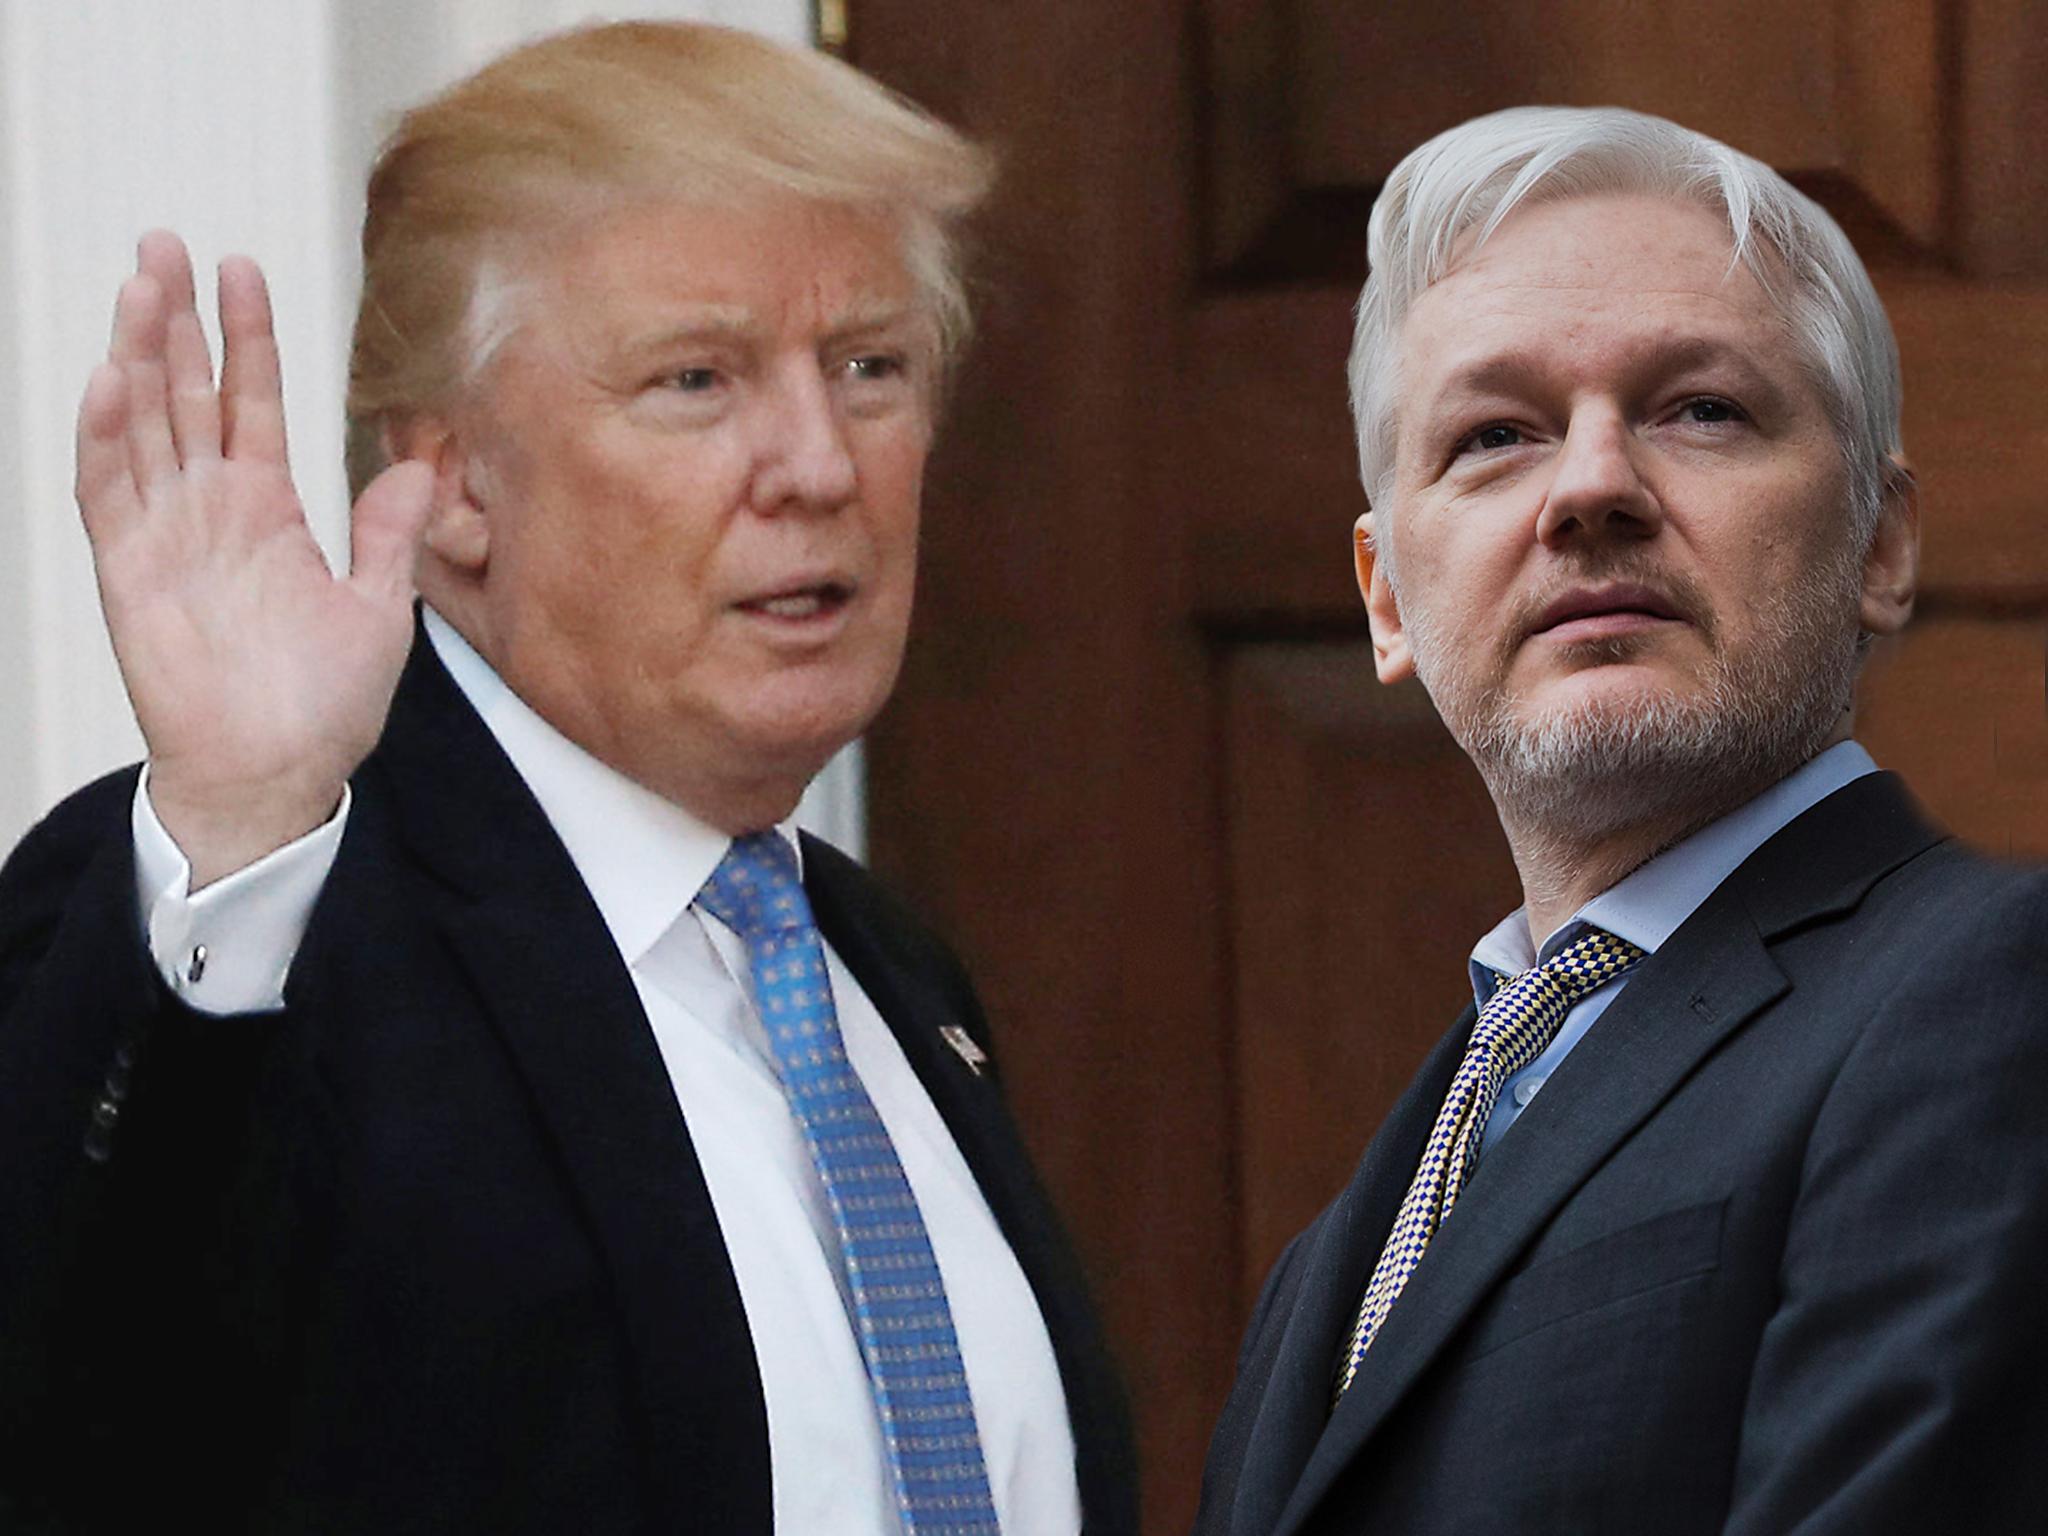 Donald Trump and Julian Assange are neck and neck for Time 